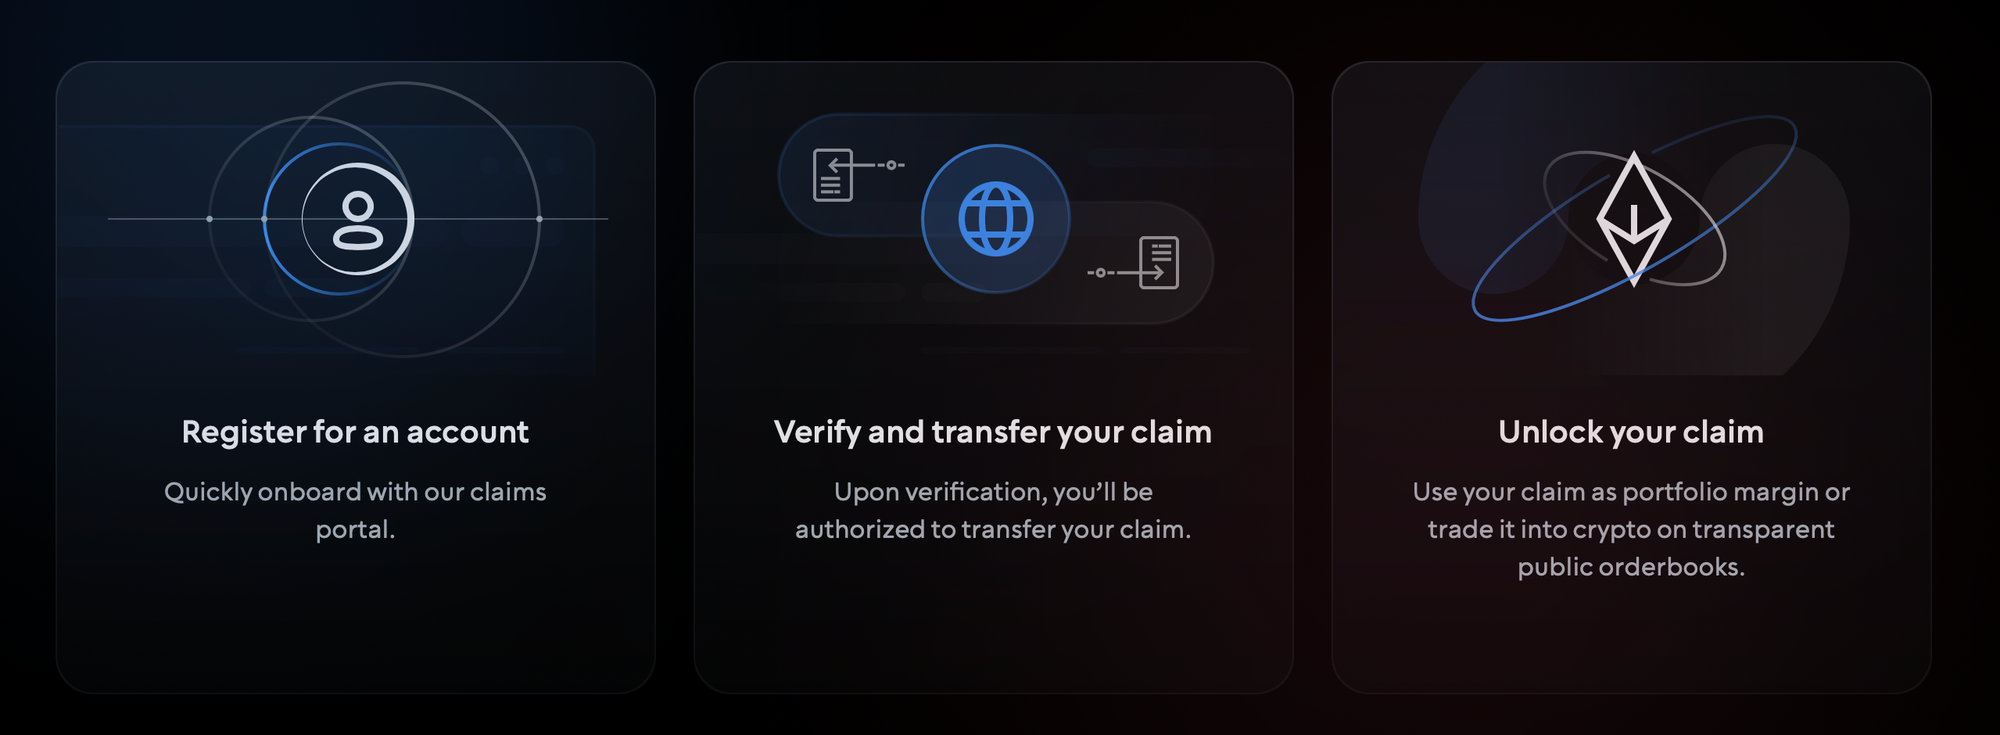 Trade of claim on OPNX. Source: opnx.com